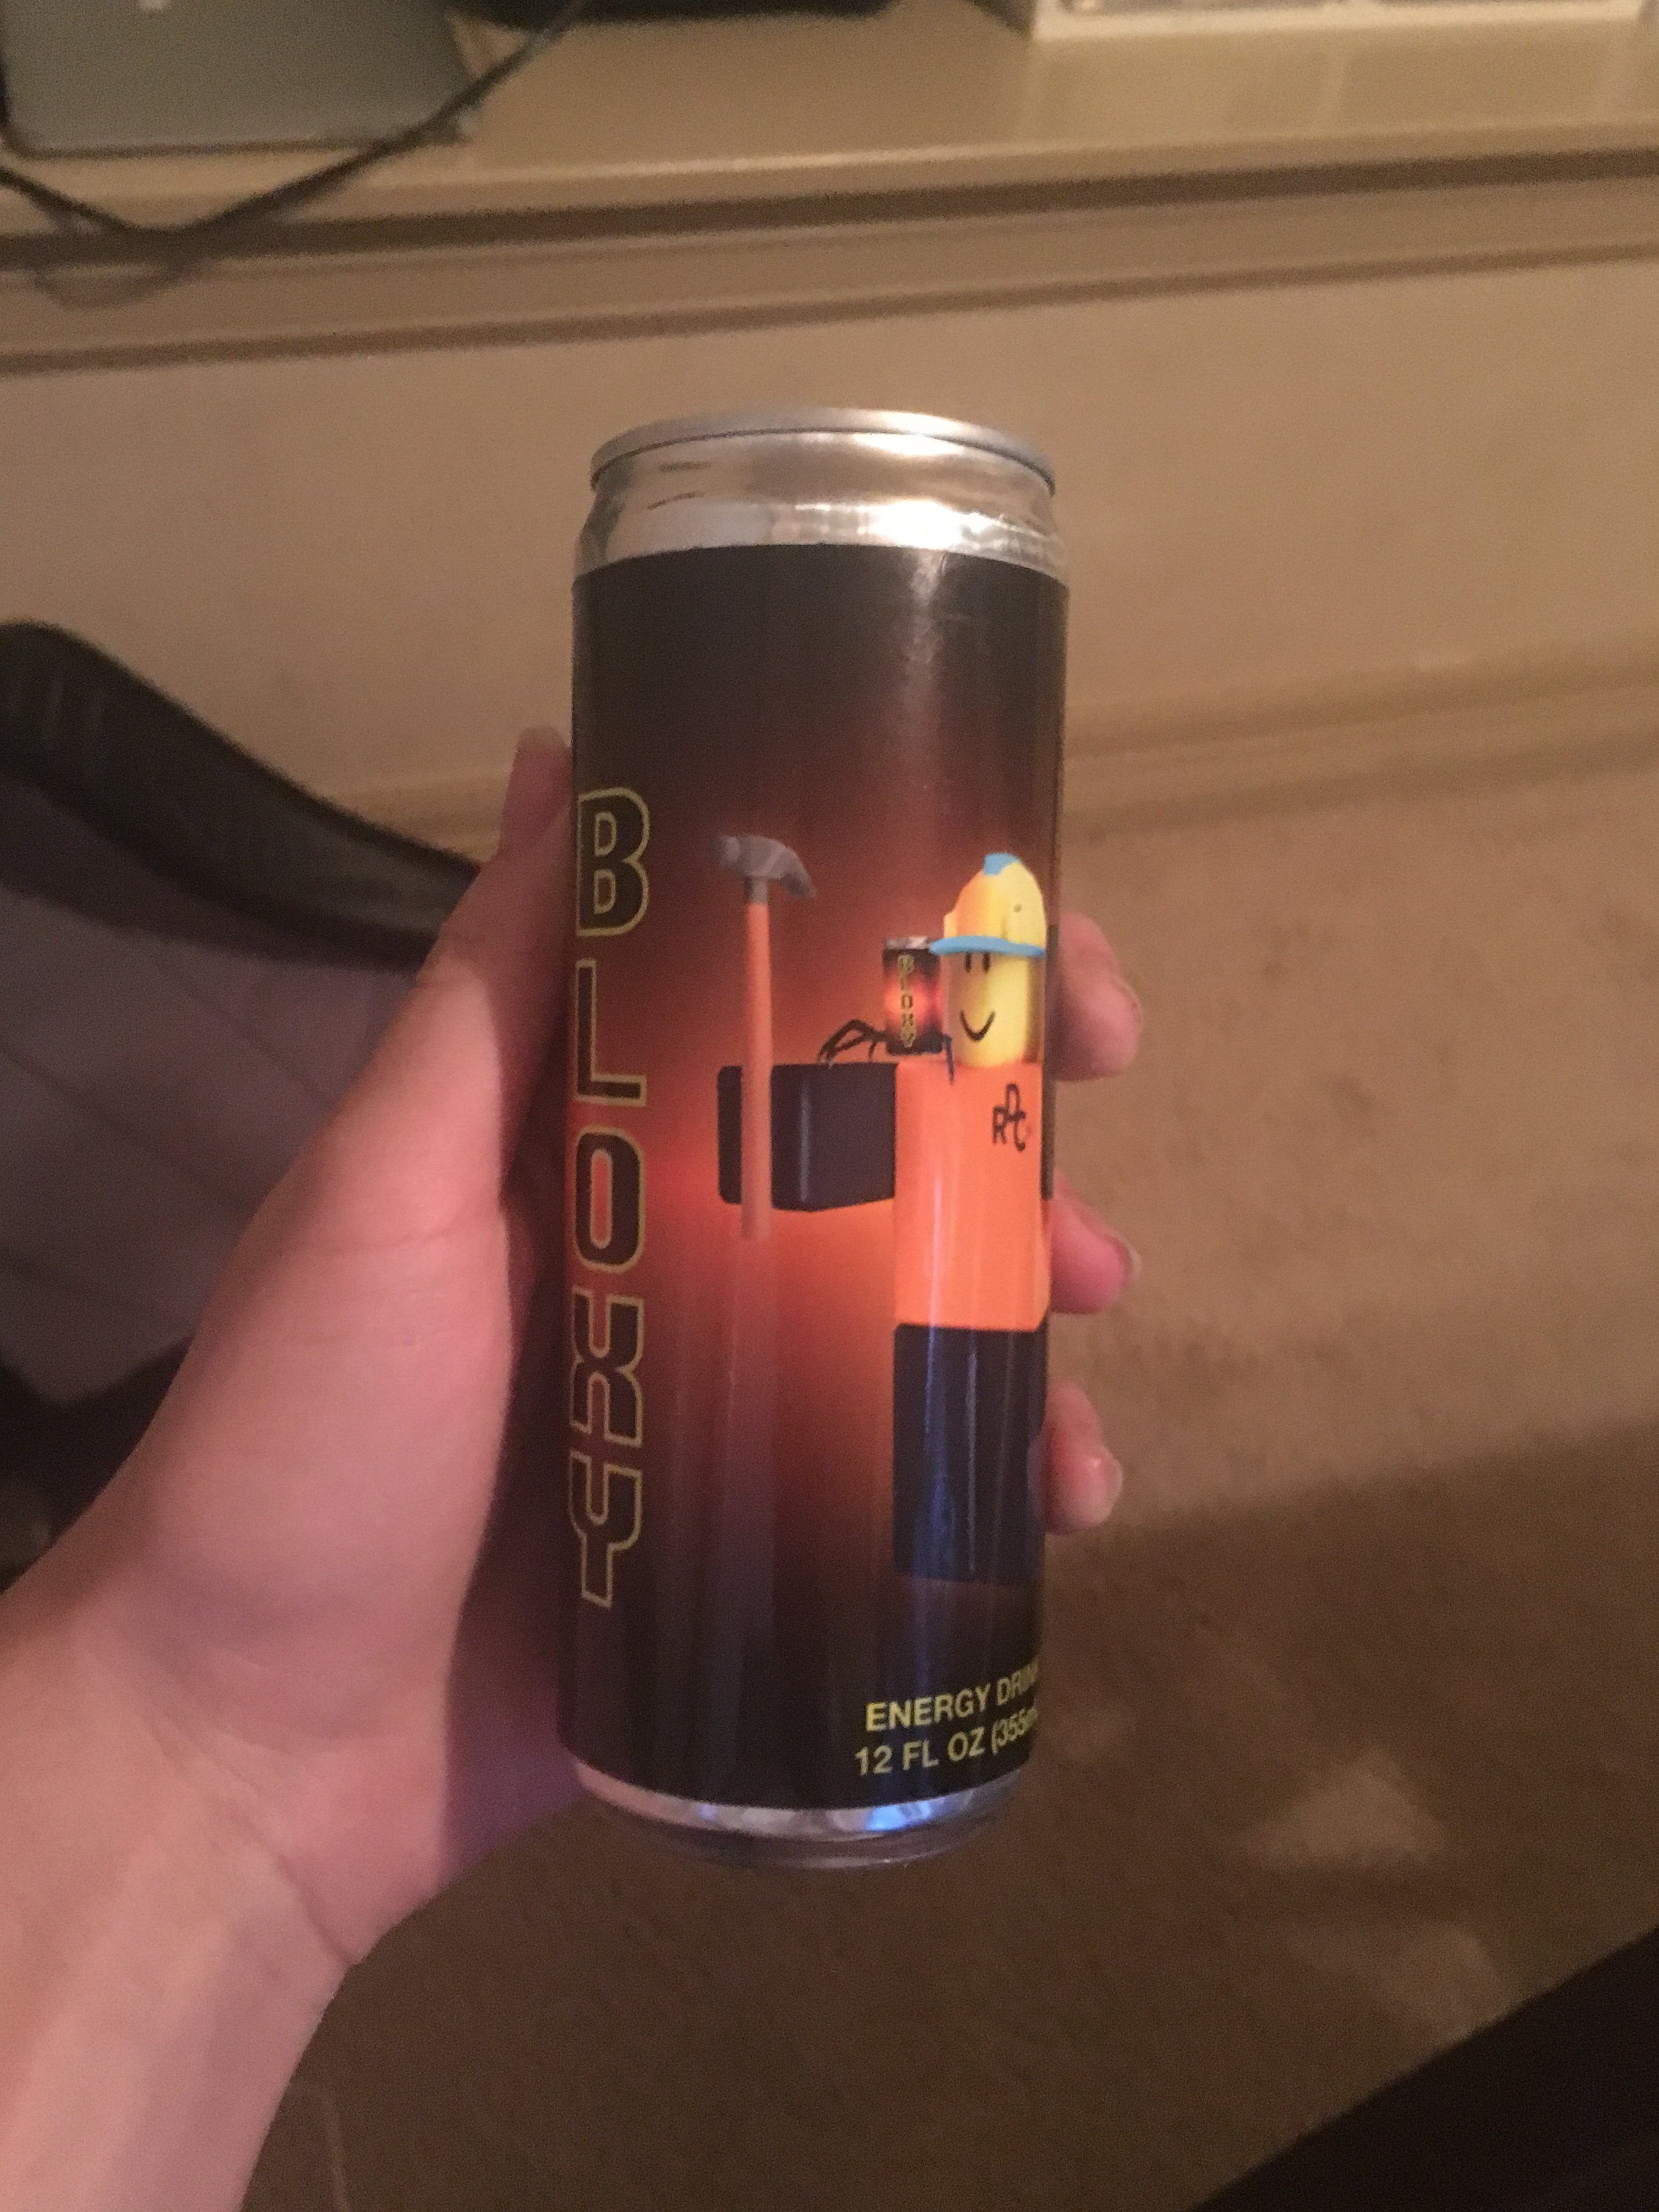 Brad Developer On Twitter 500 Retweets And I Drink The Bloxy Cola From Rdc2019 Live - roblox bloxy cola in real life